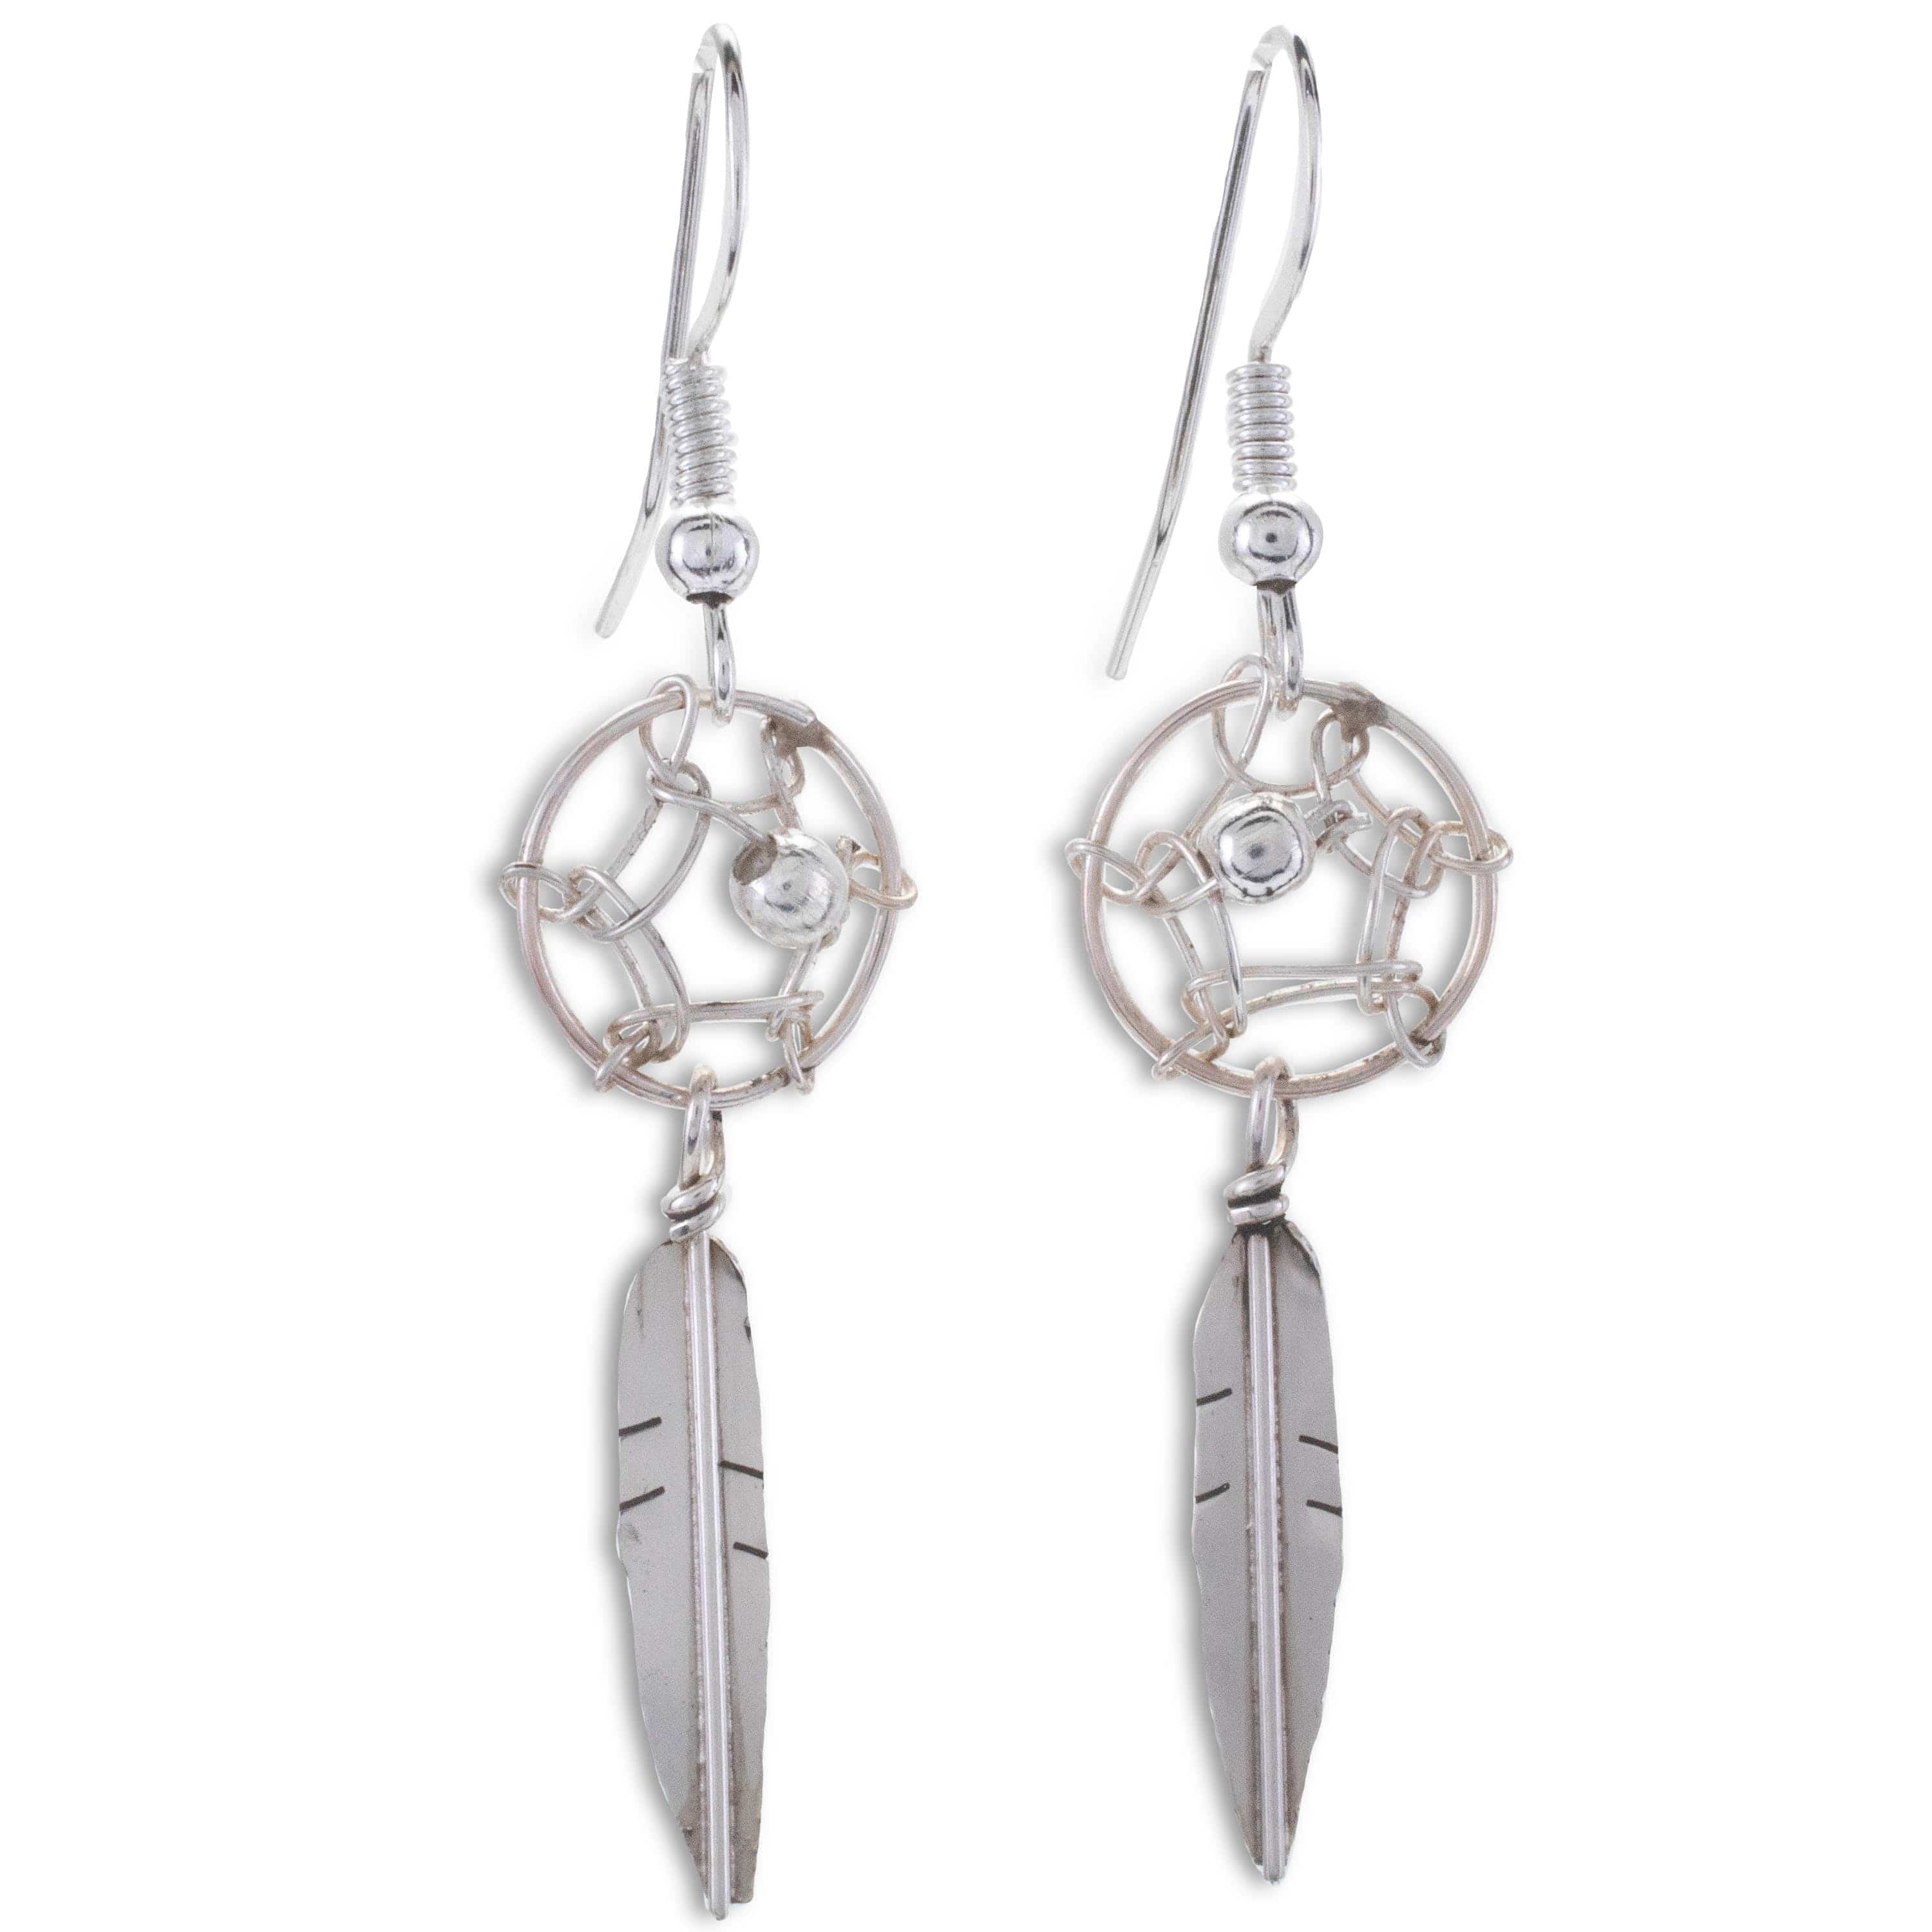 Kalifano Native American Jewelry Lorenzo Arviso Dream Catcher USA Native American Made 925 Sterling Silver Dangly Earrings NAE60.005